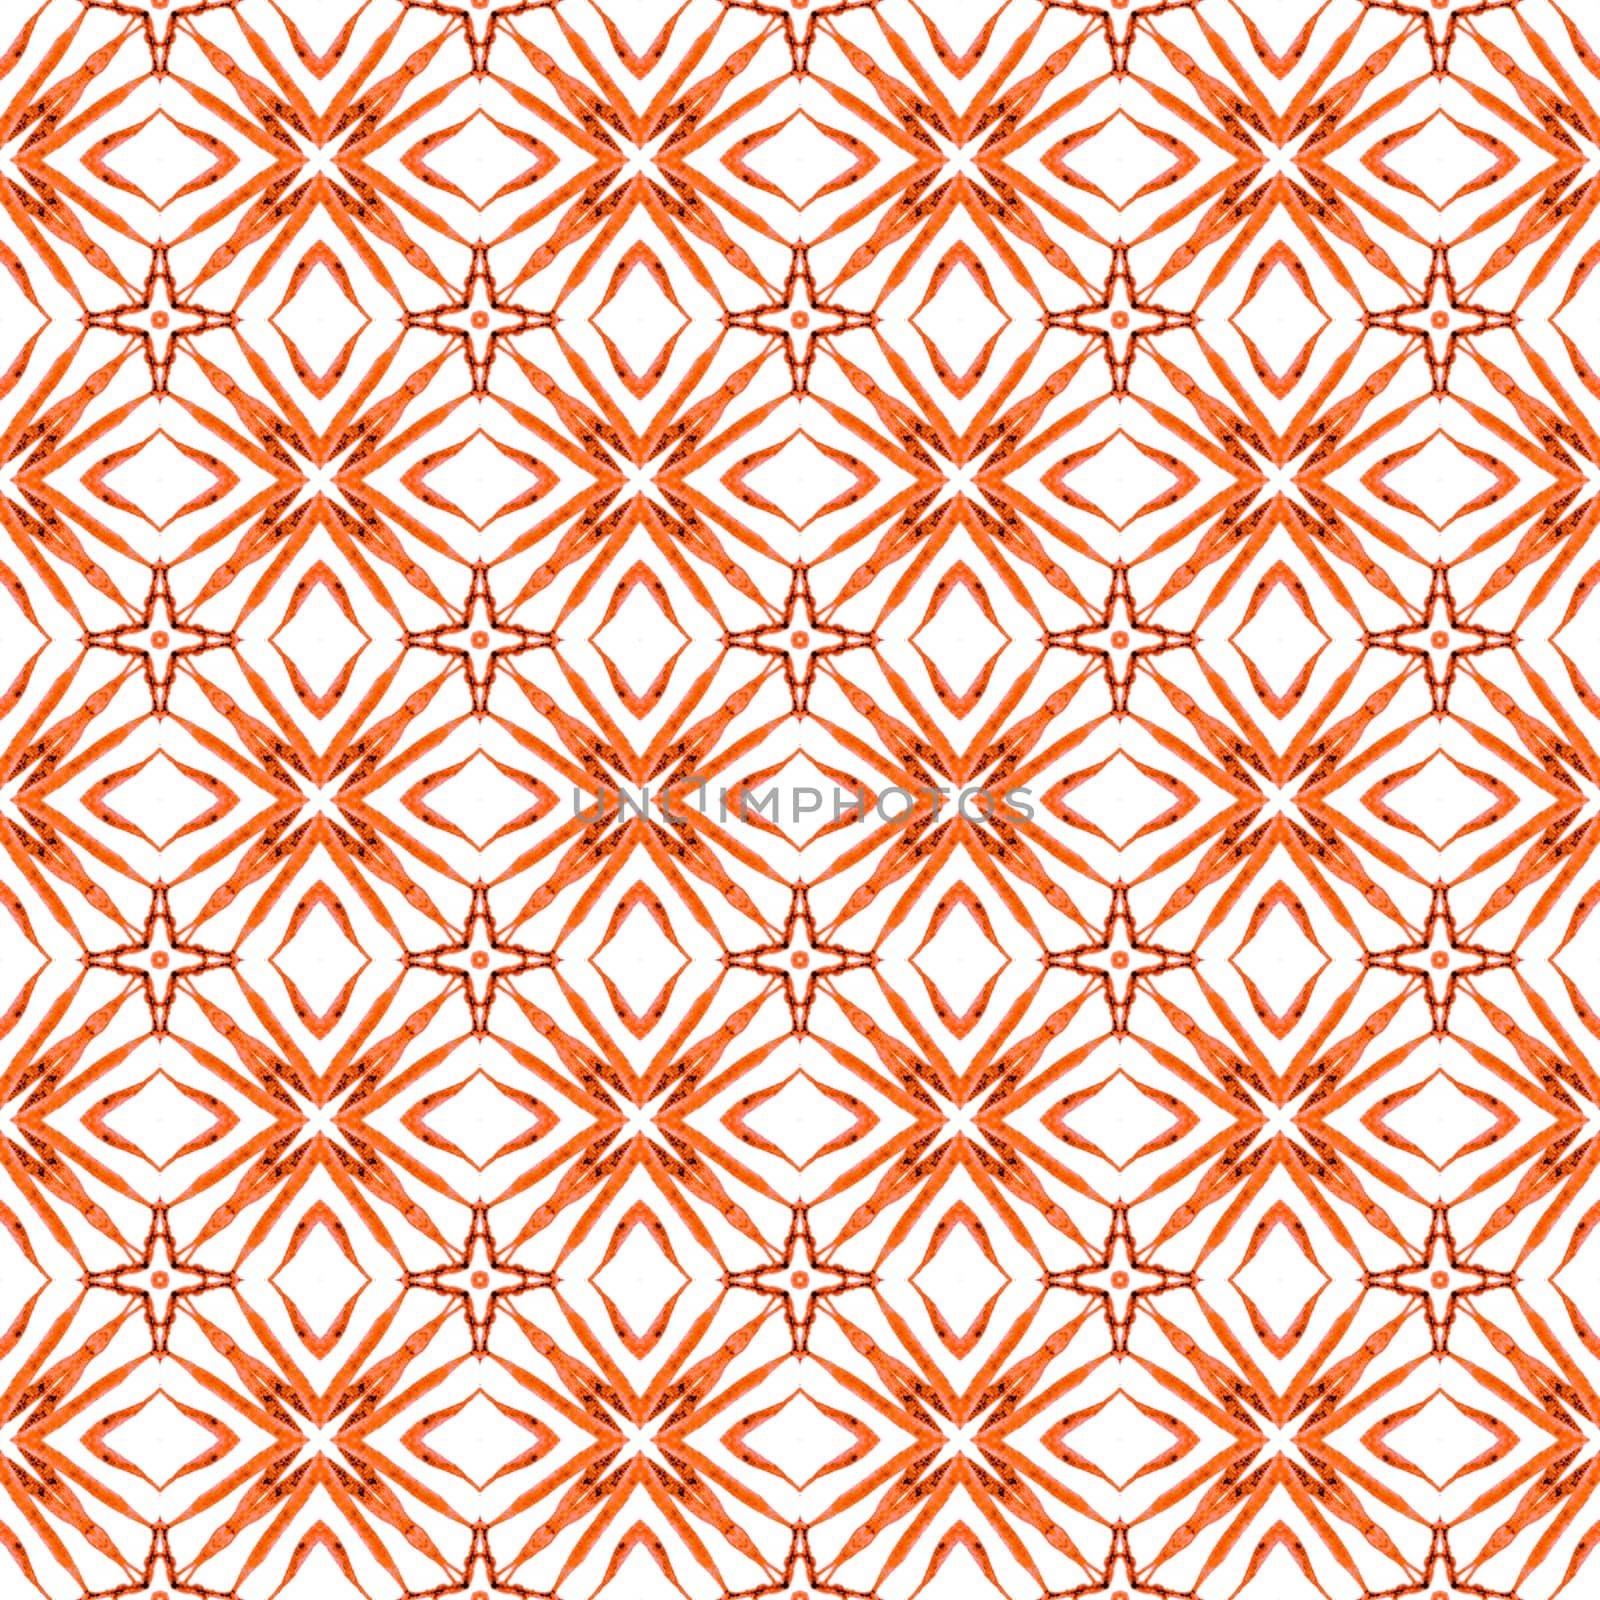 Hand drawn tropical seamless border. Orange eminent boho chic summer design. Tropical seamless pattern. Textile ready attractive print, swimwear fabric, wallpaper, wrapping.